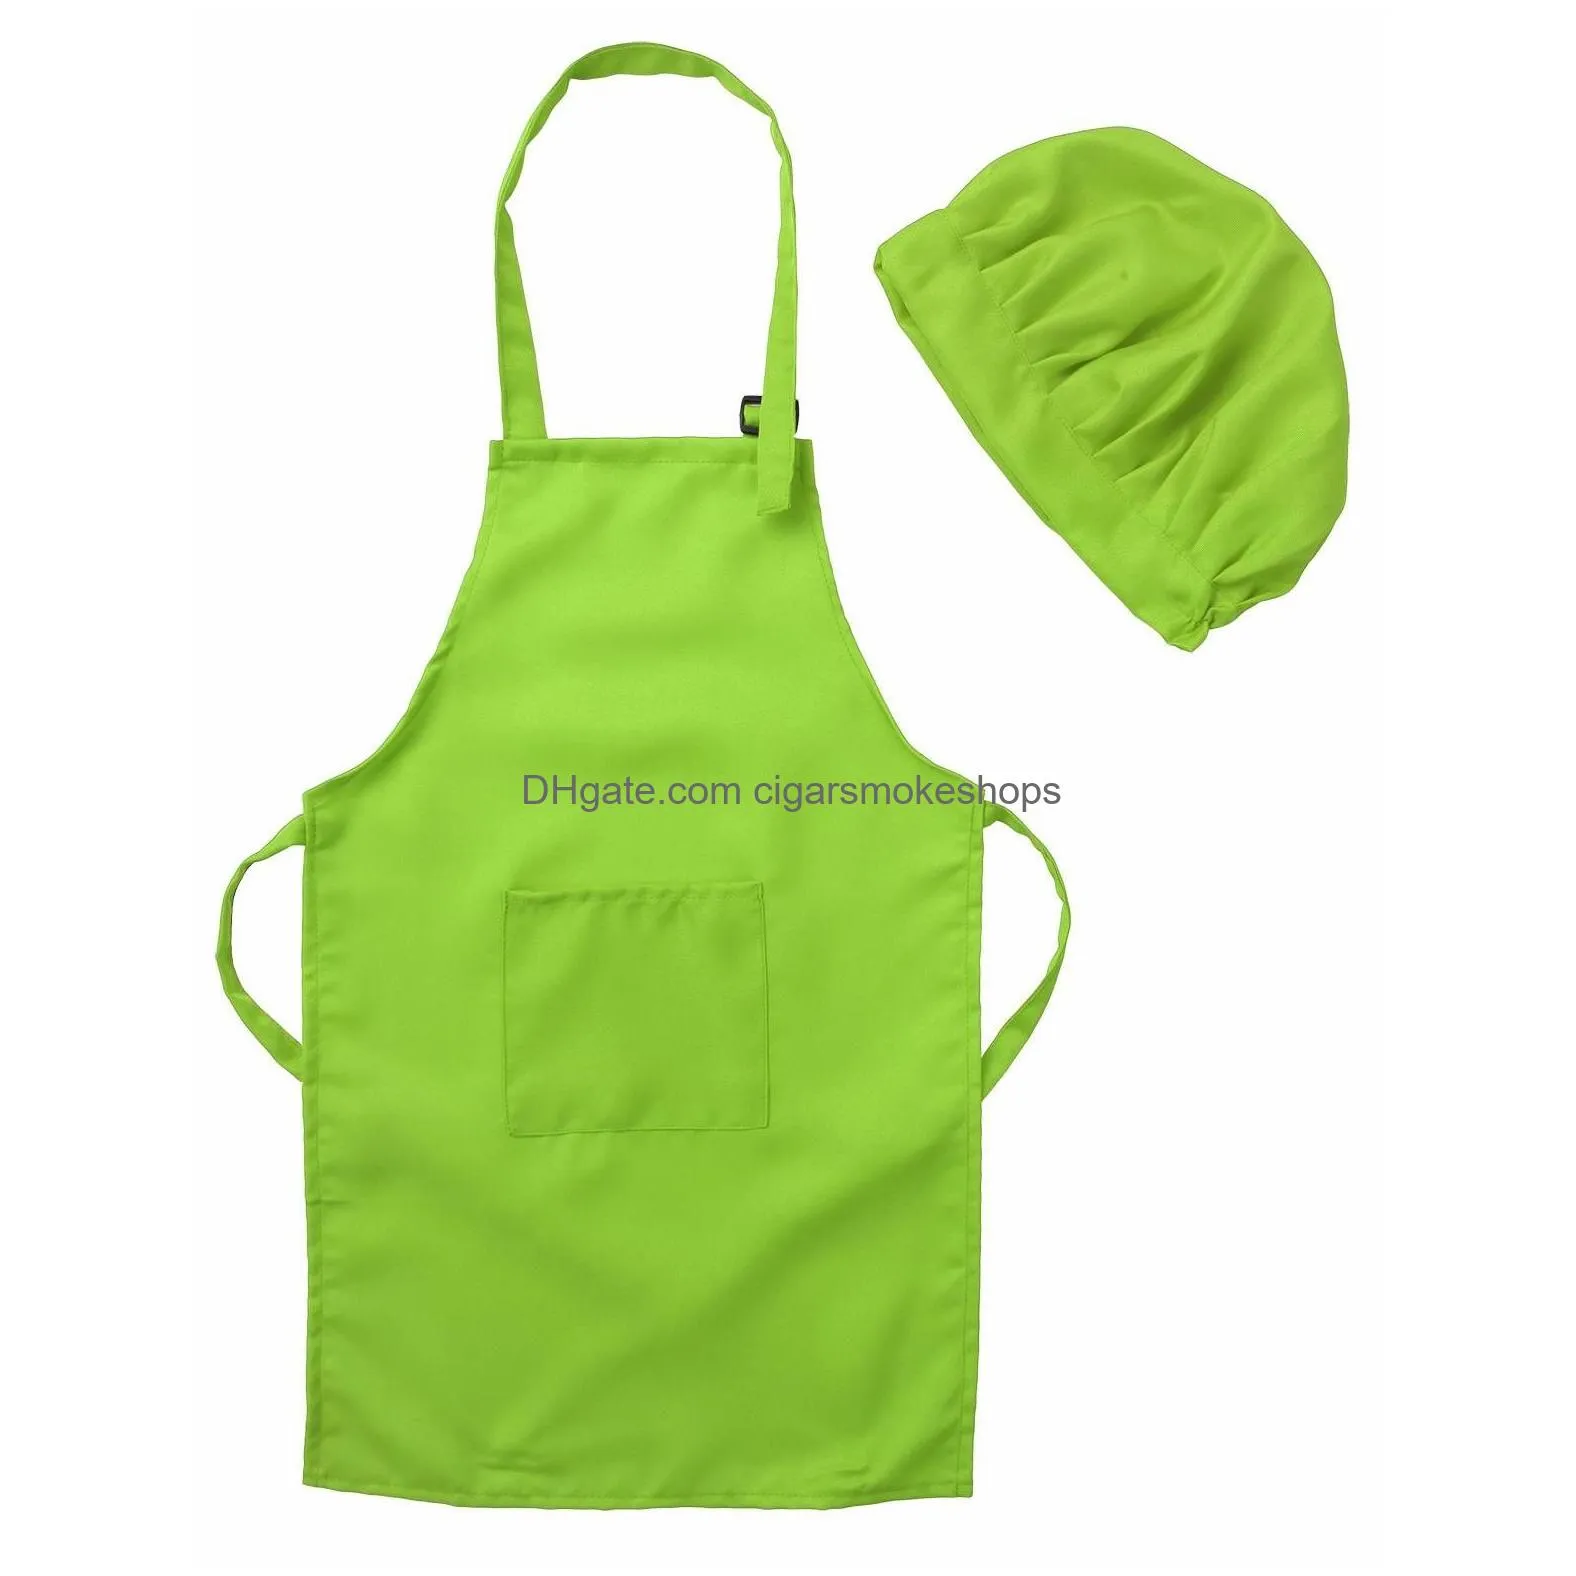 Aprons Us Stock Printable Customize Logo Children Chef Apron Set Kitchen Waists 12 Colors Kids With Hats For Painting Cooking Drop Del Dhe1U